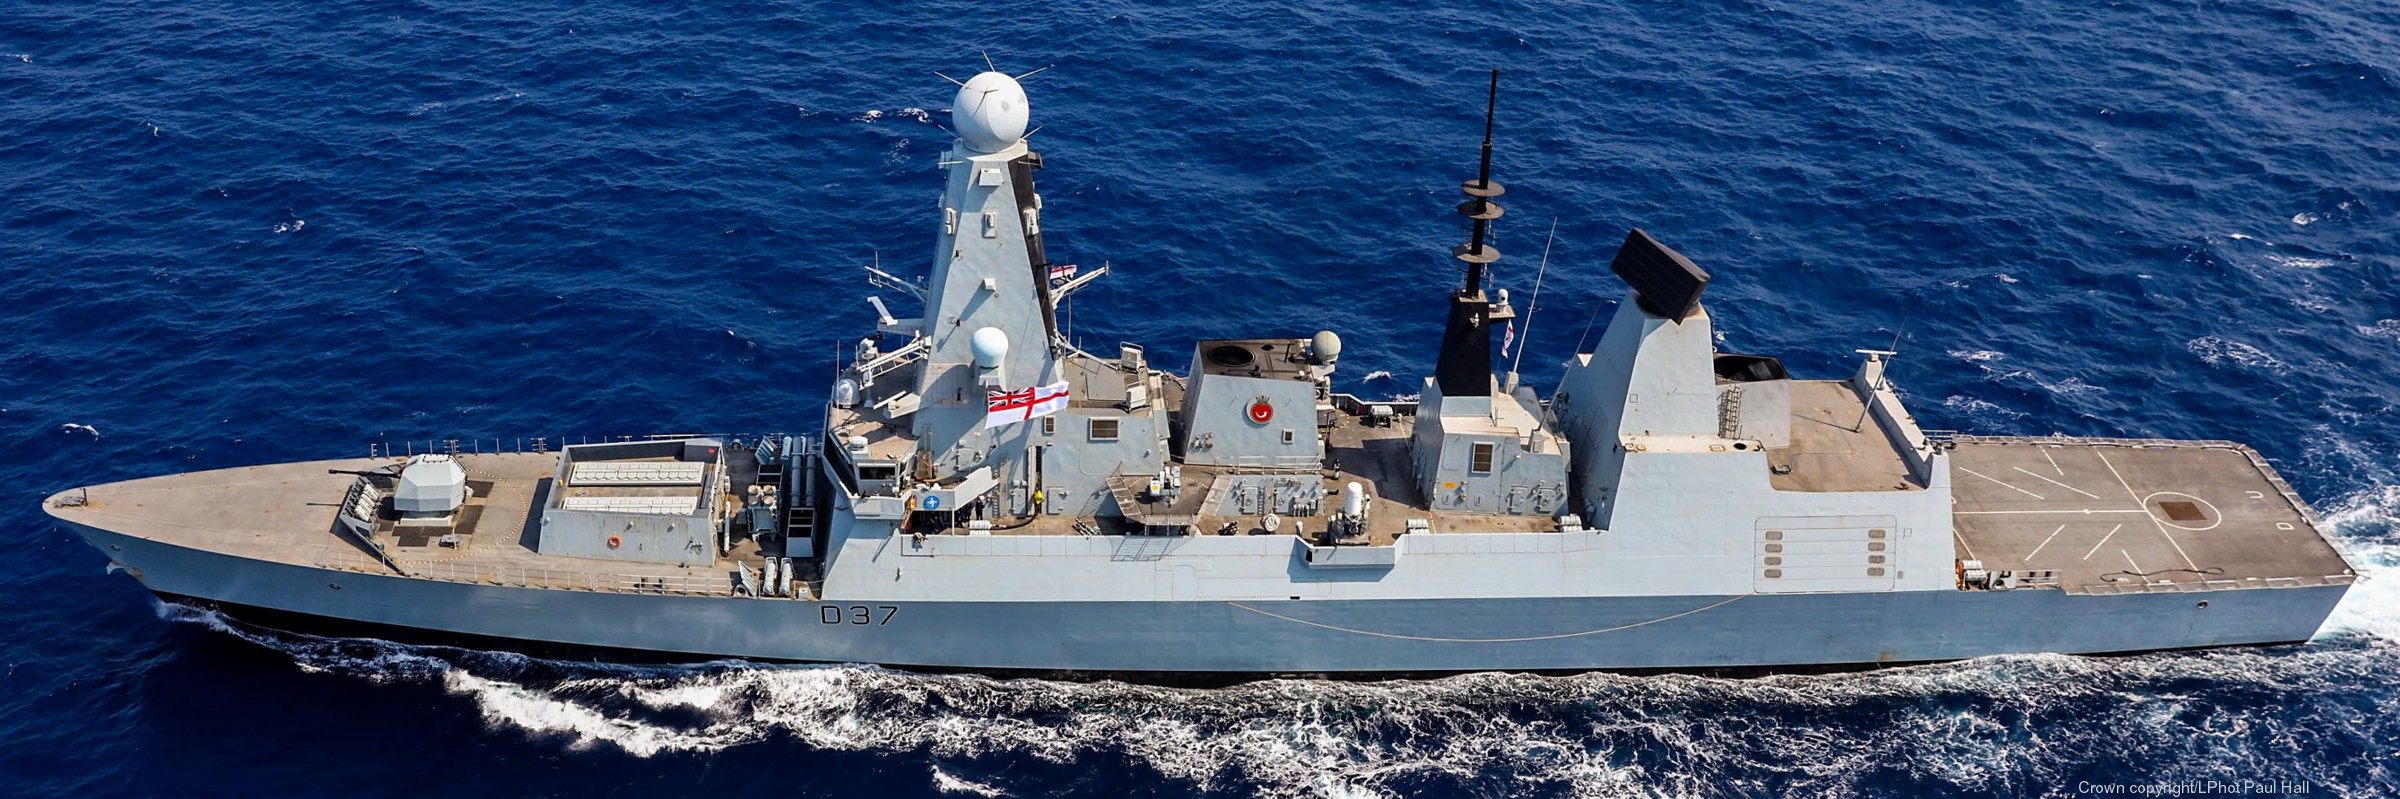 d37 hms duncan d-37 type 45 daring class guided missile destroyer ddg royal navy sea viper 57